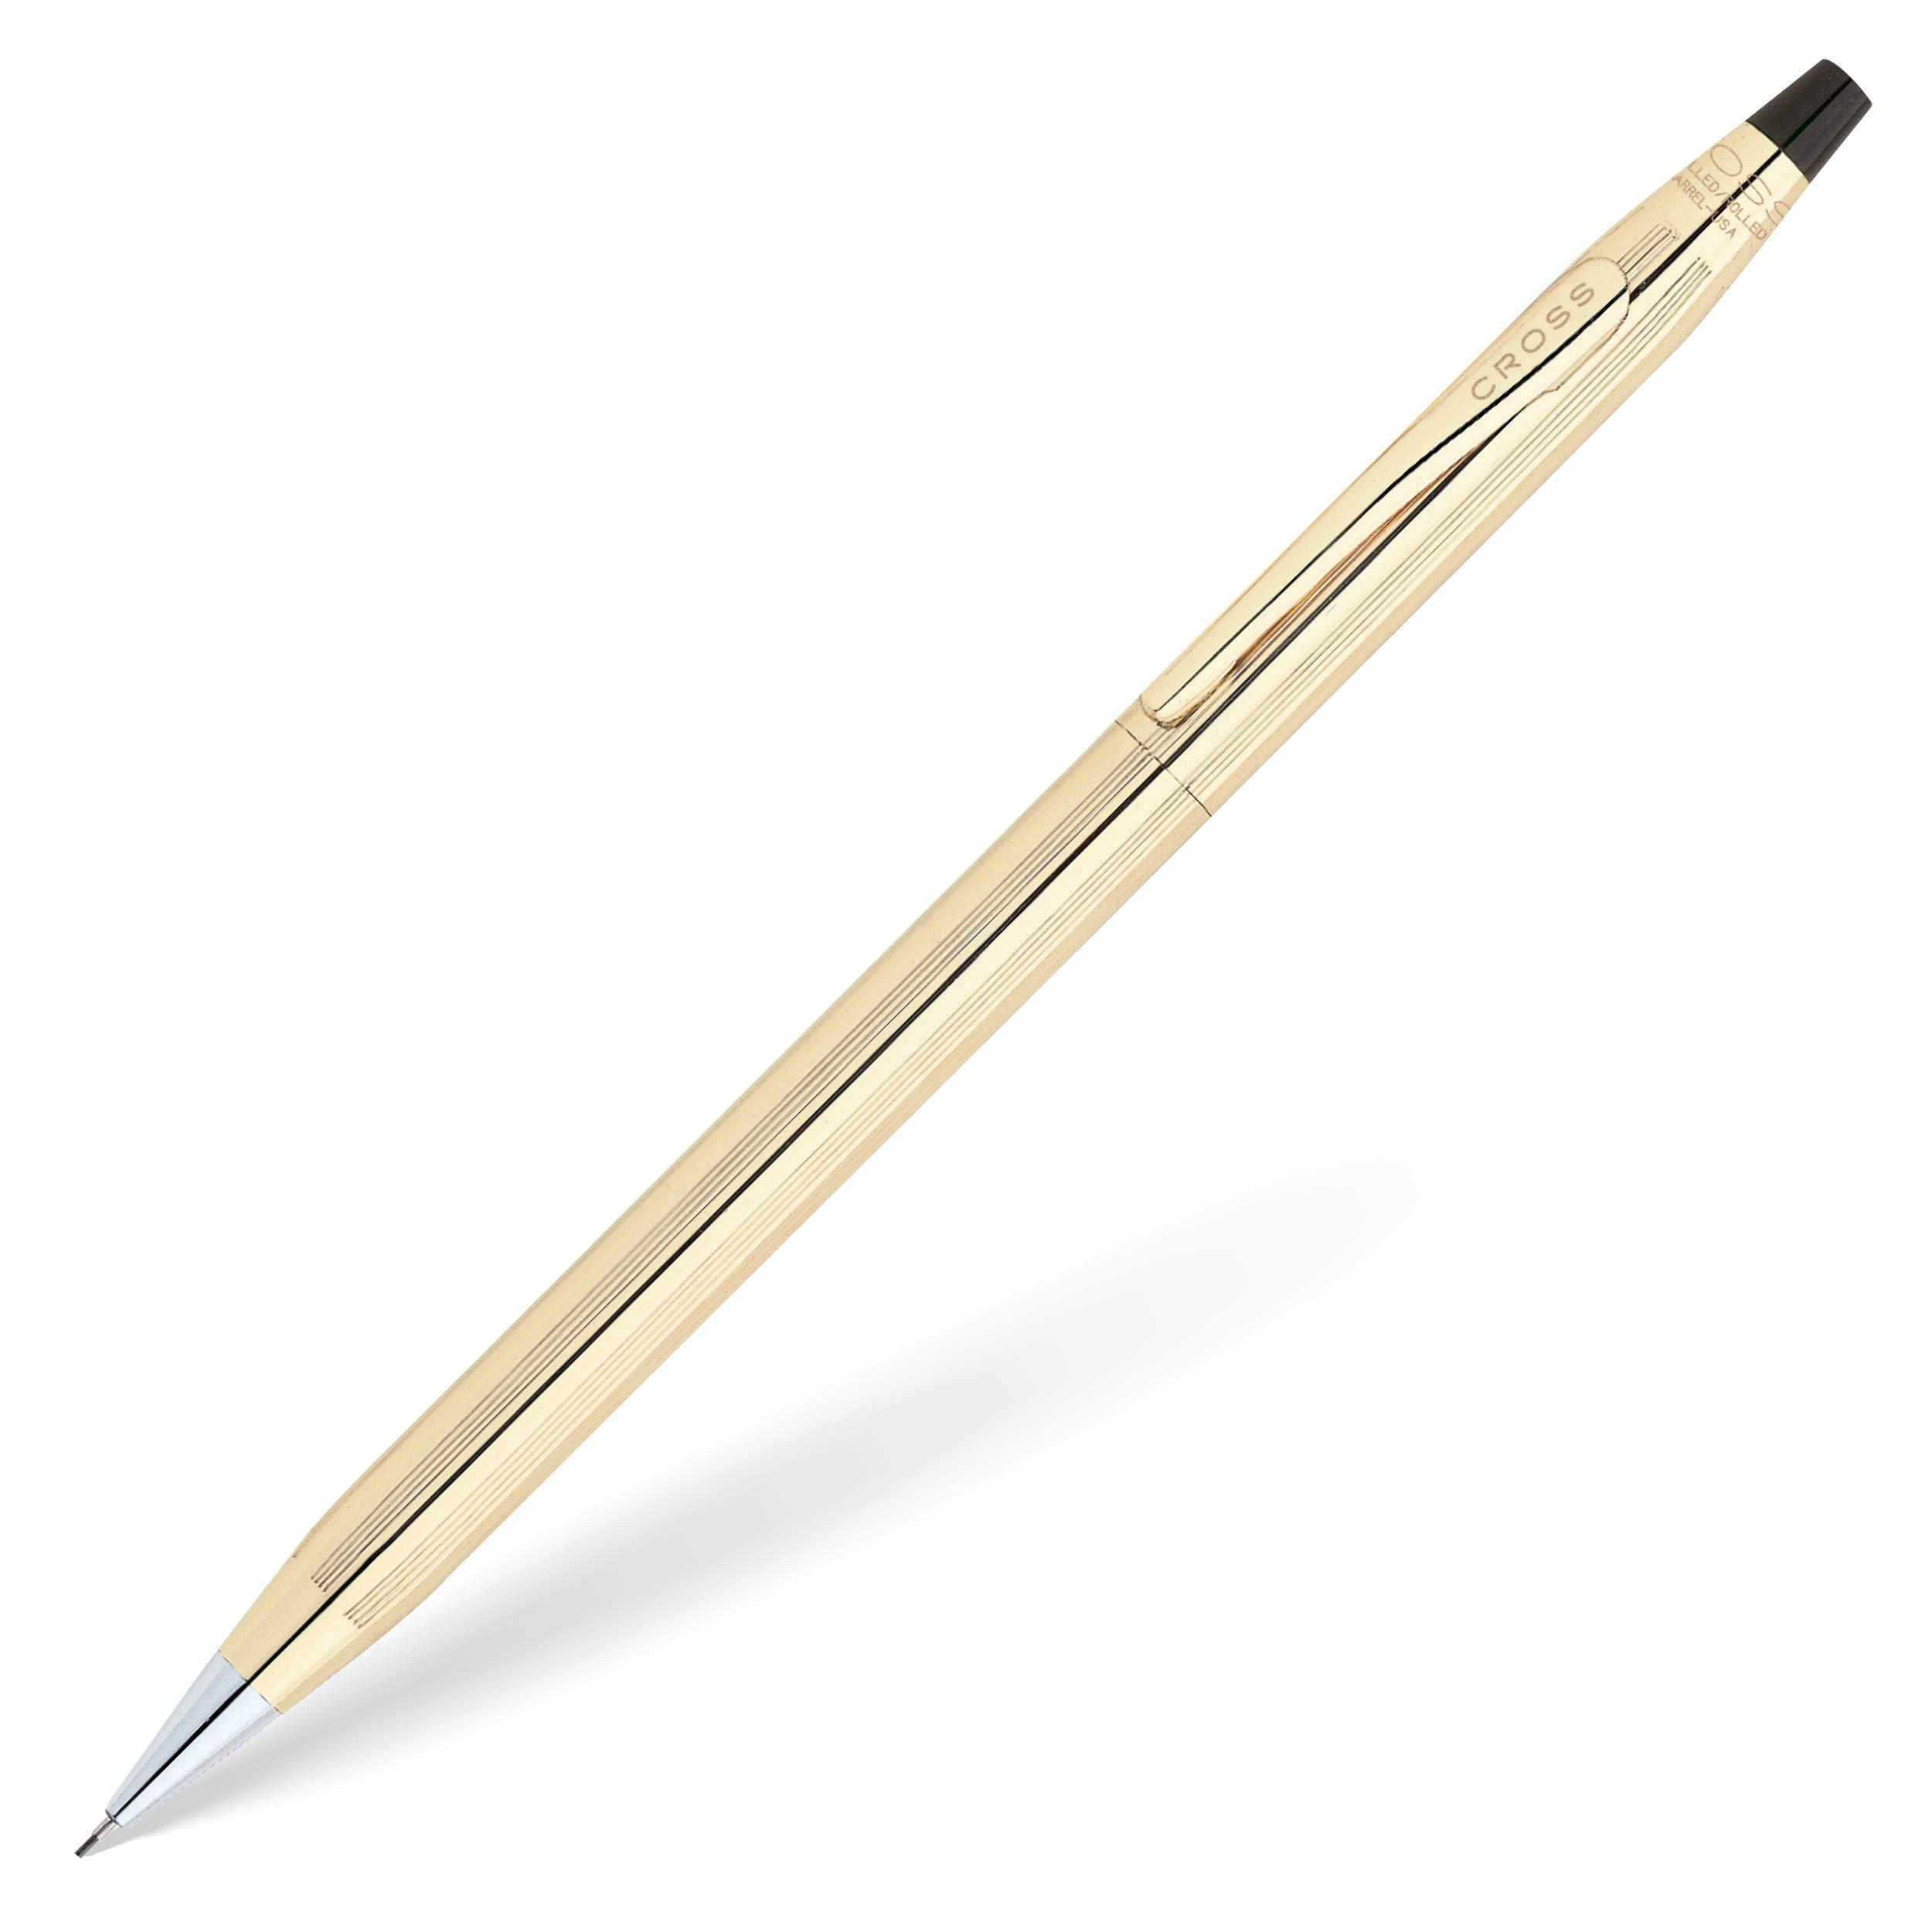 cross classic century Refillable Pencil, 07mm, Includes Luxury gift Box - 10 carat gold-Filled